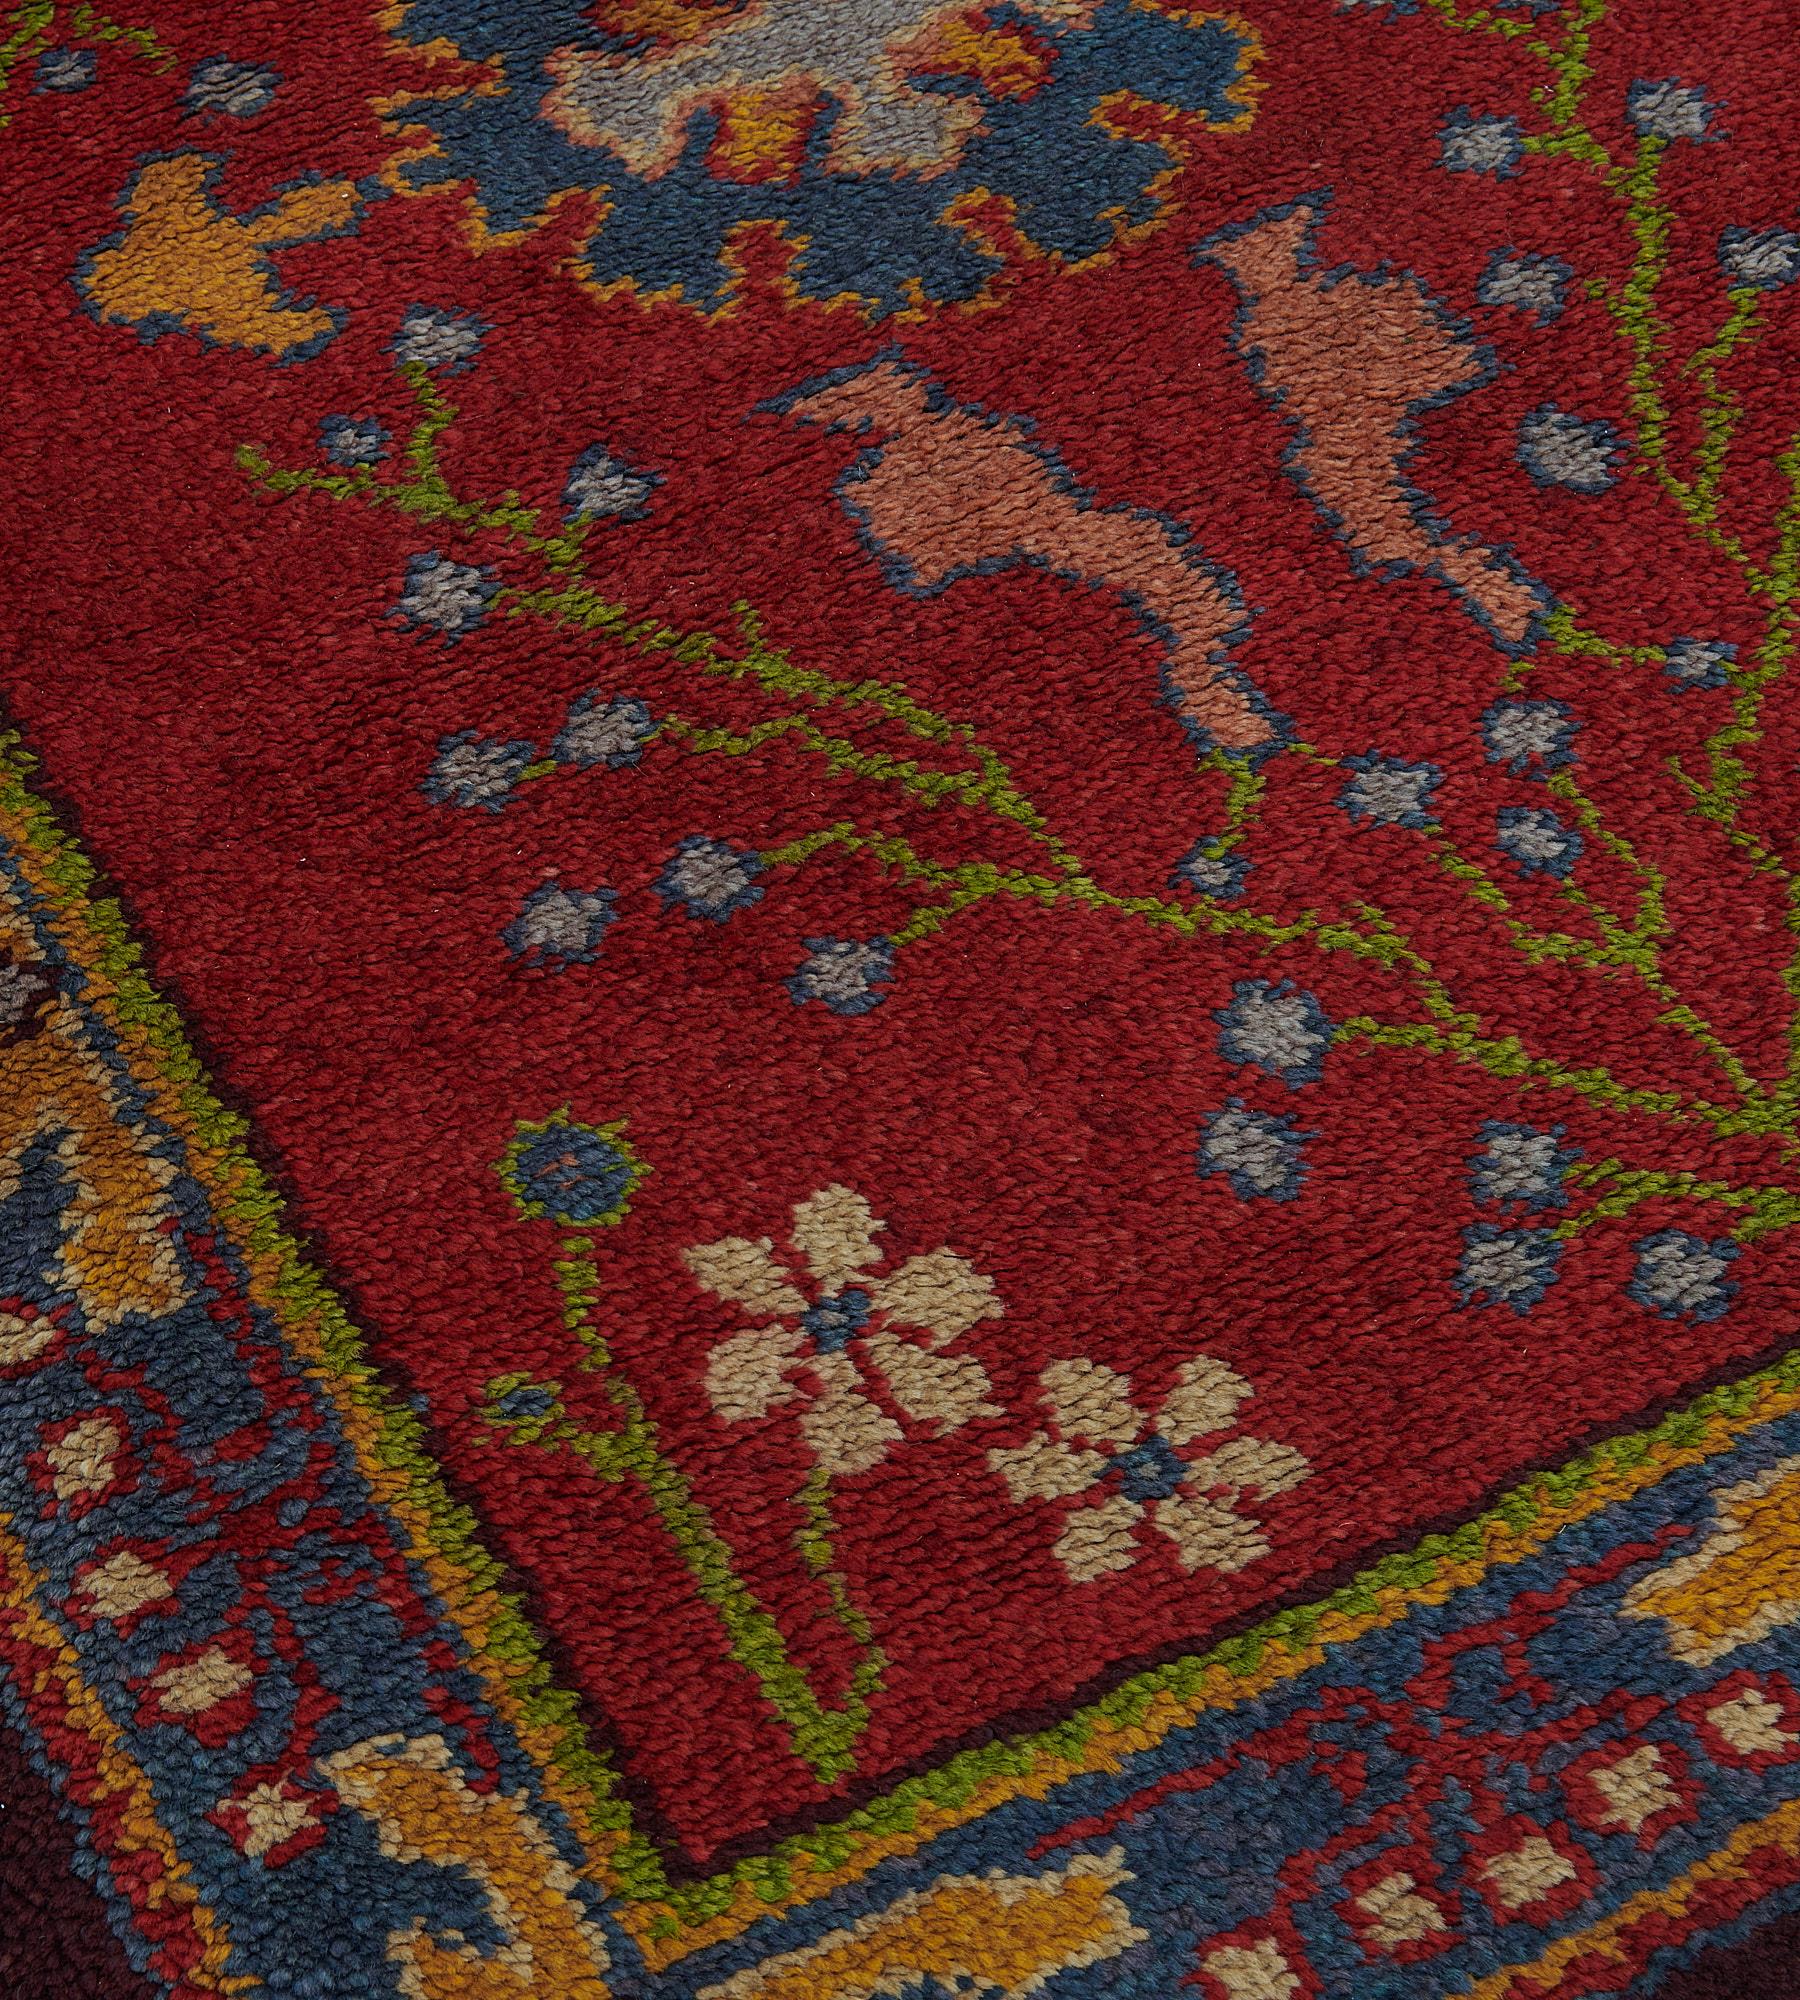 This antique, circa 1900, Irish Donegal rug has a deep red field with a central lozenge cartouche issuing at each side a mustard yellow part palmette with shaded pink flowerheads flanked by a delicate lime green tendril with daisy sprays and issuing